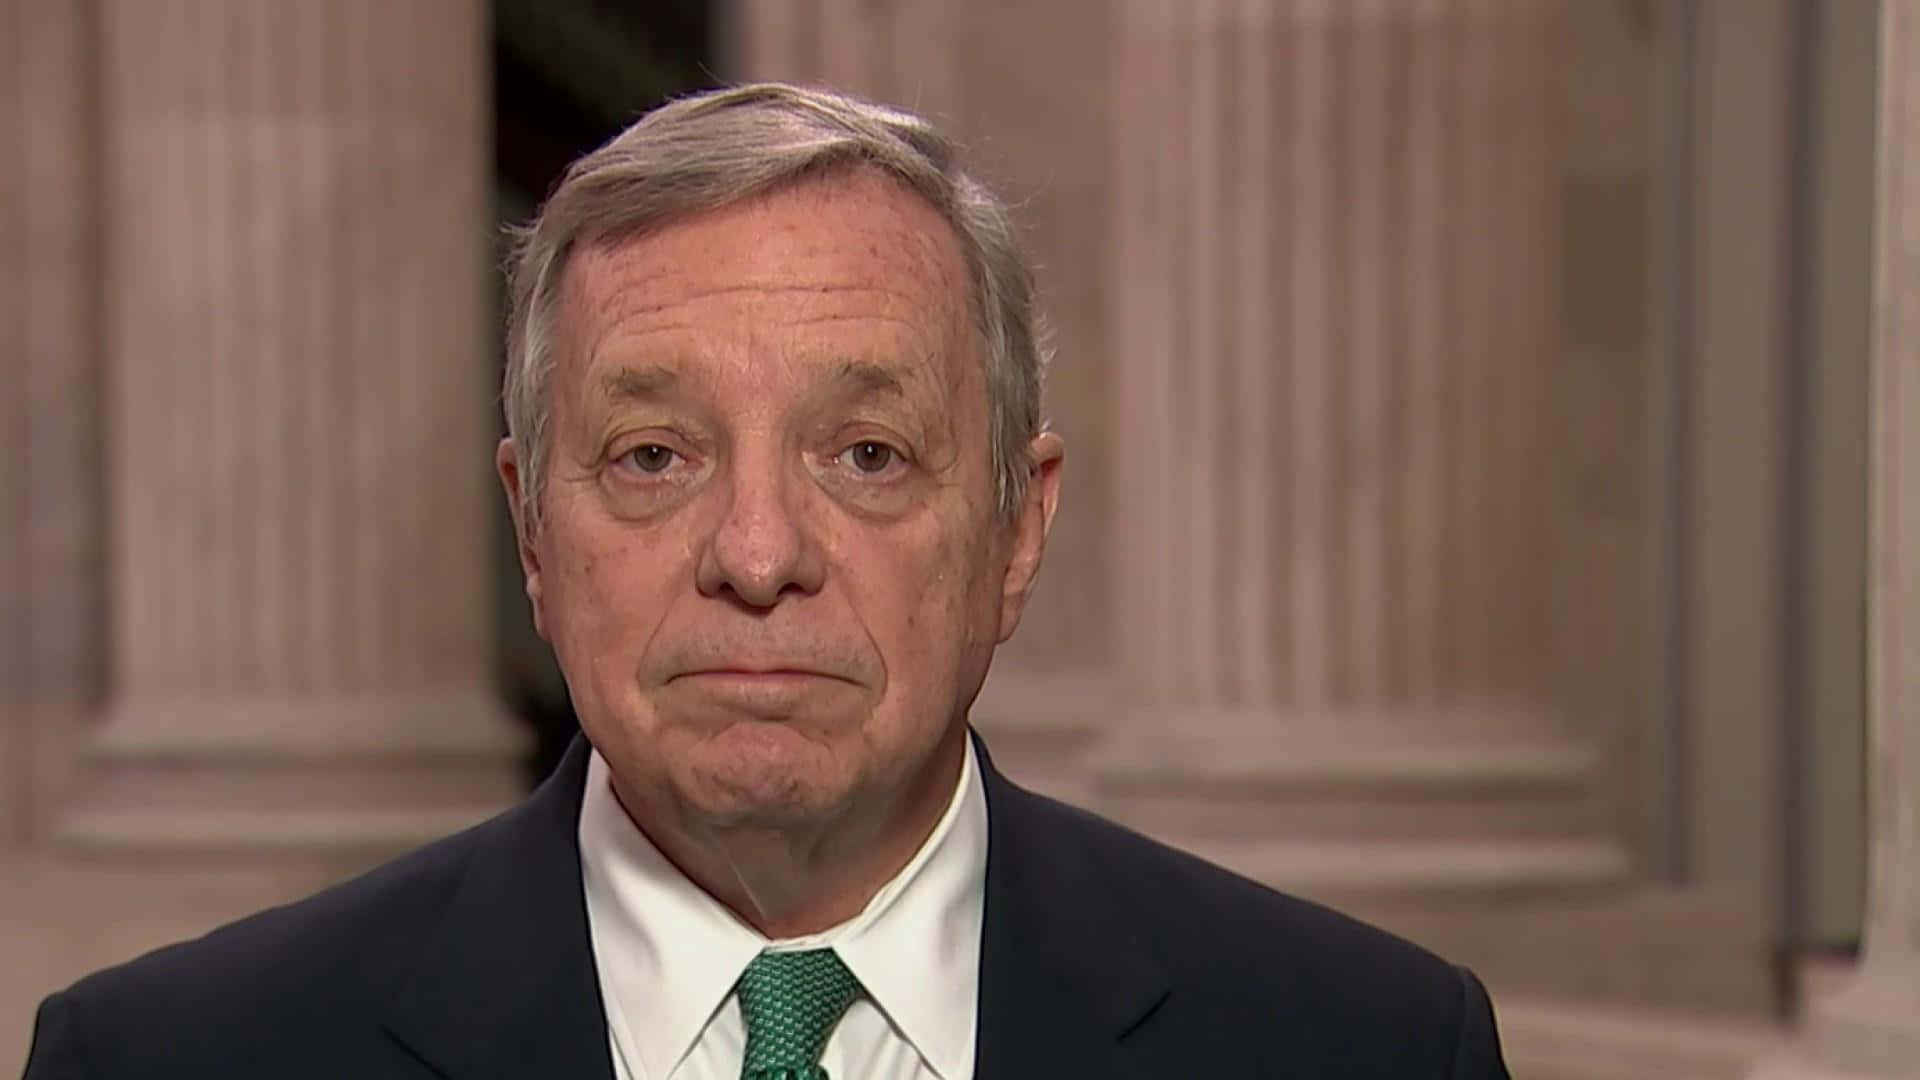 Richard Durbin delivering a speech with a straight face Wallpaper